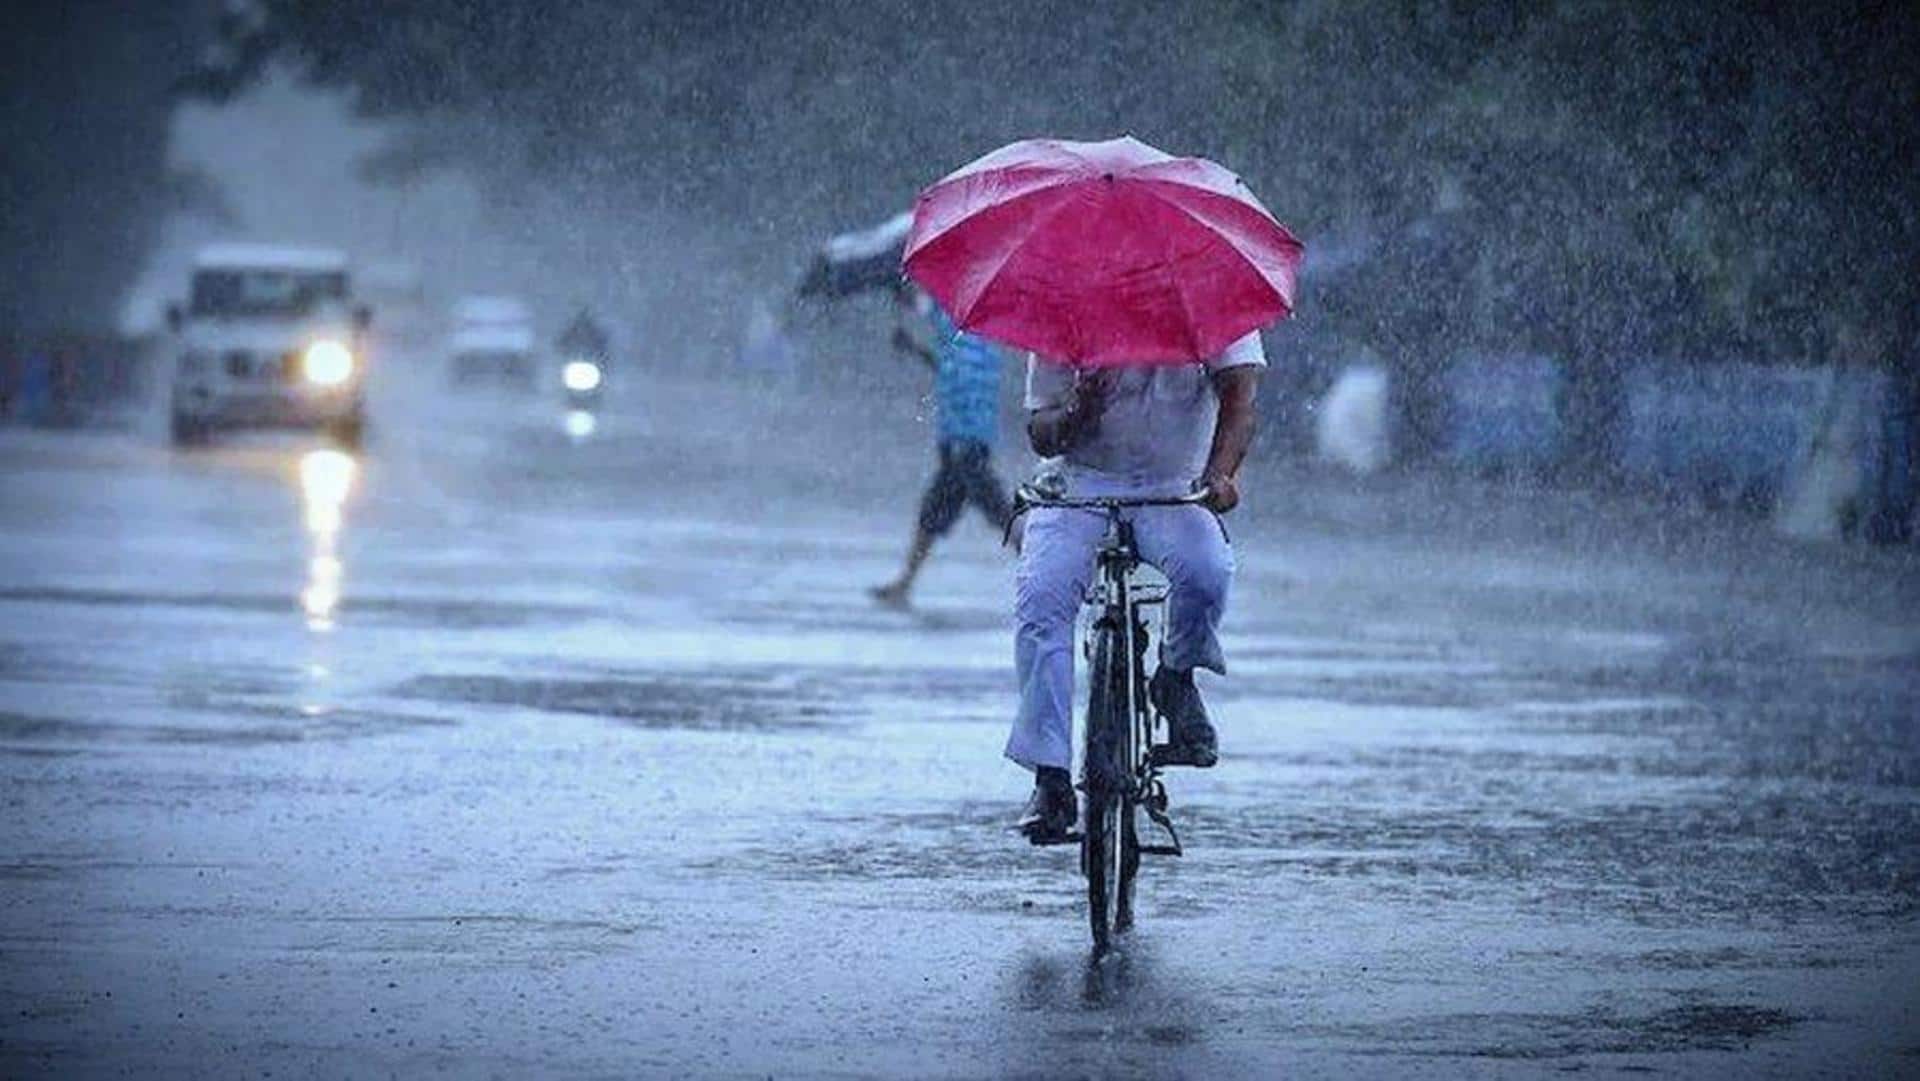 Monsoon onset likely to be weak this year, warn experts